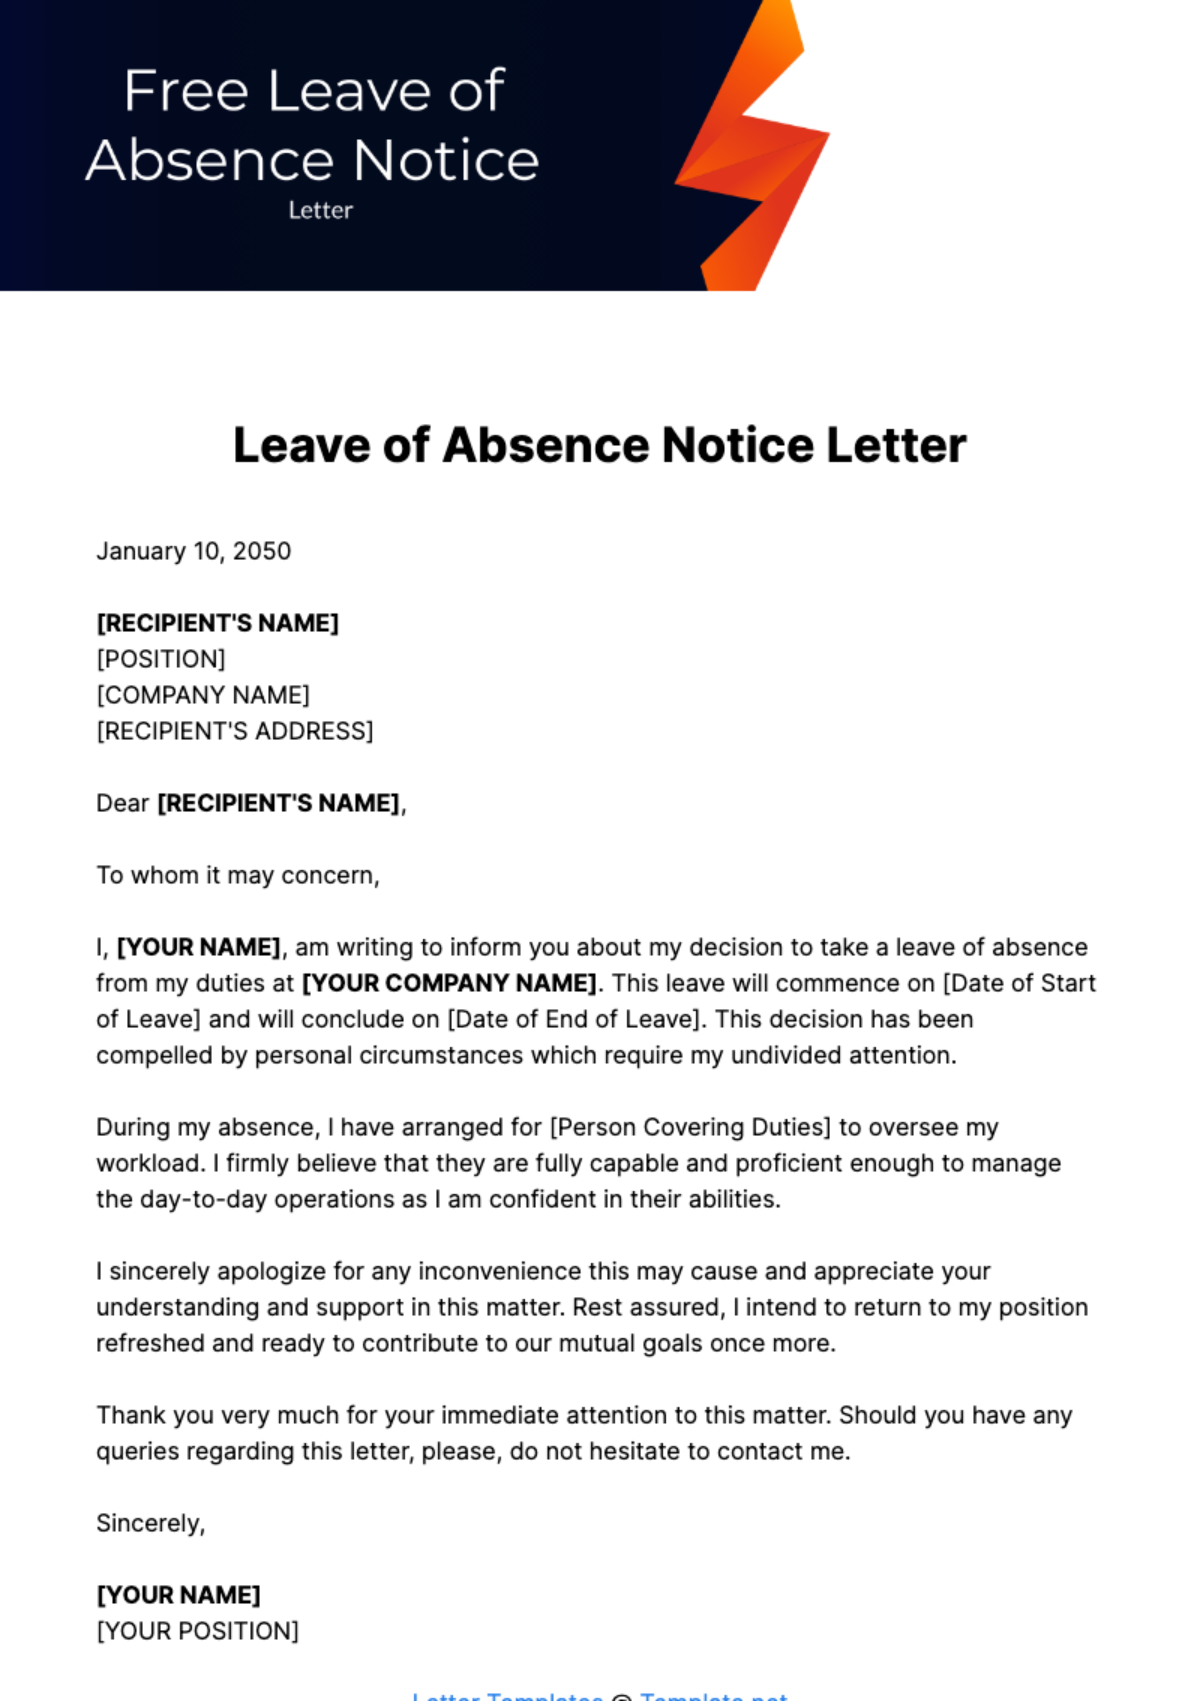 Free Leave of Absence Notice Letter Template